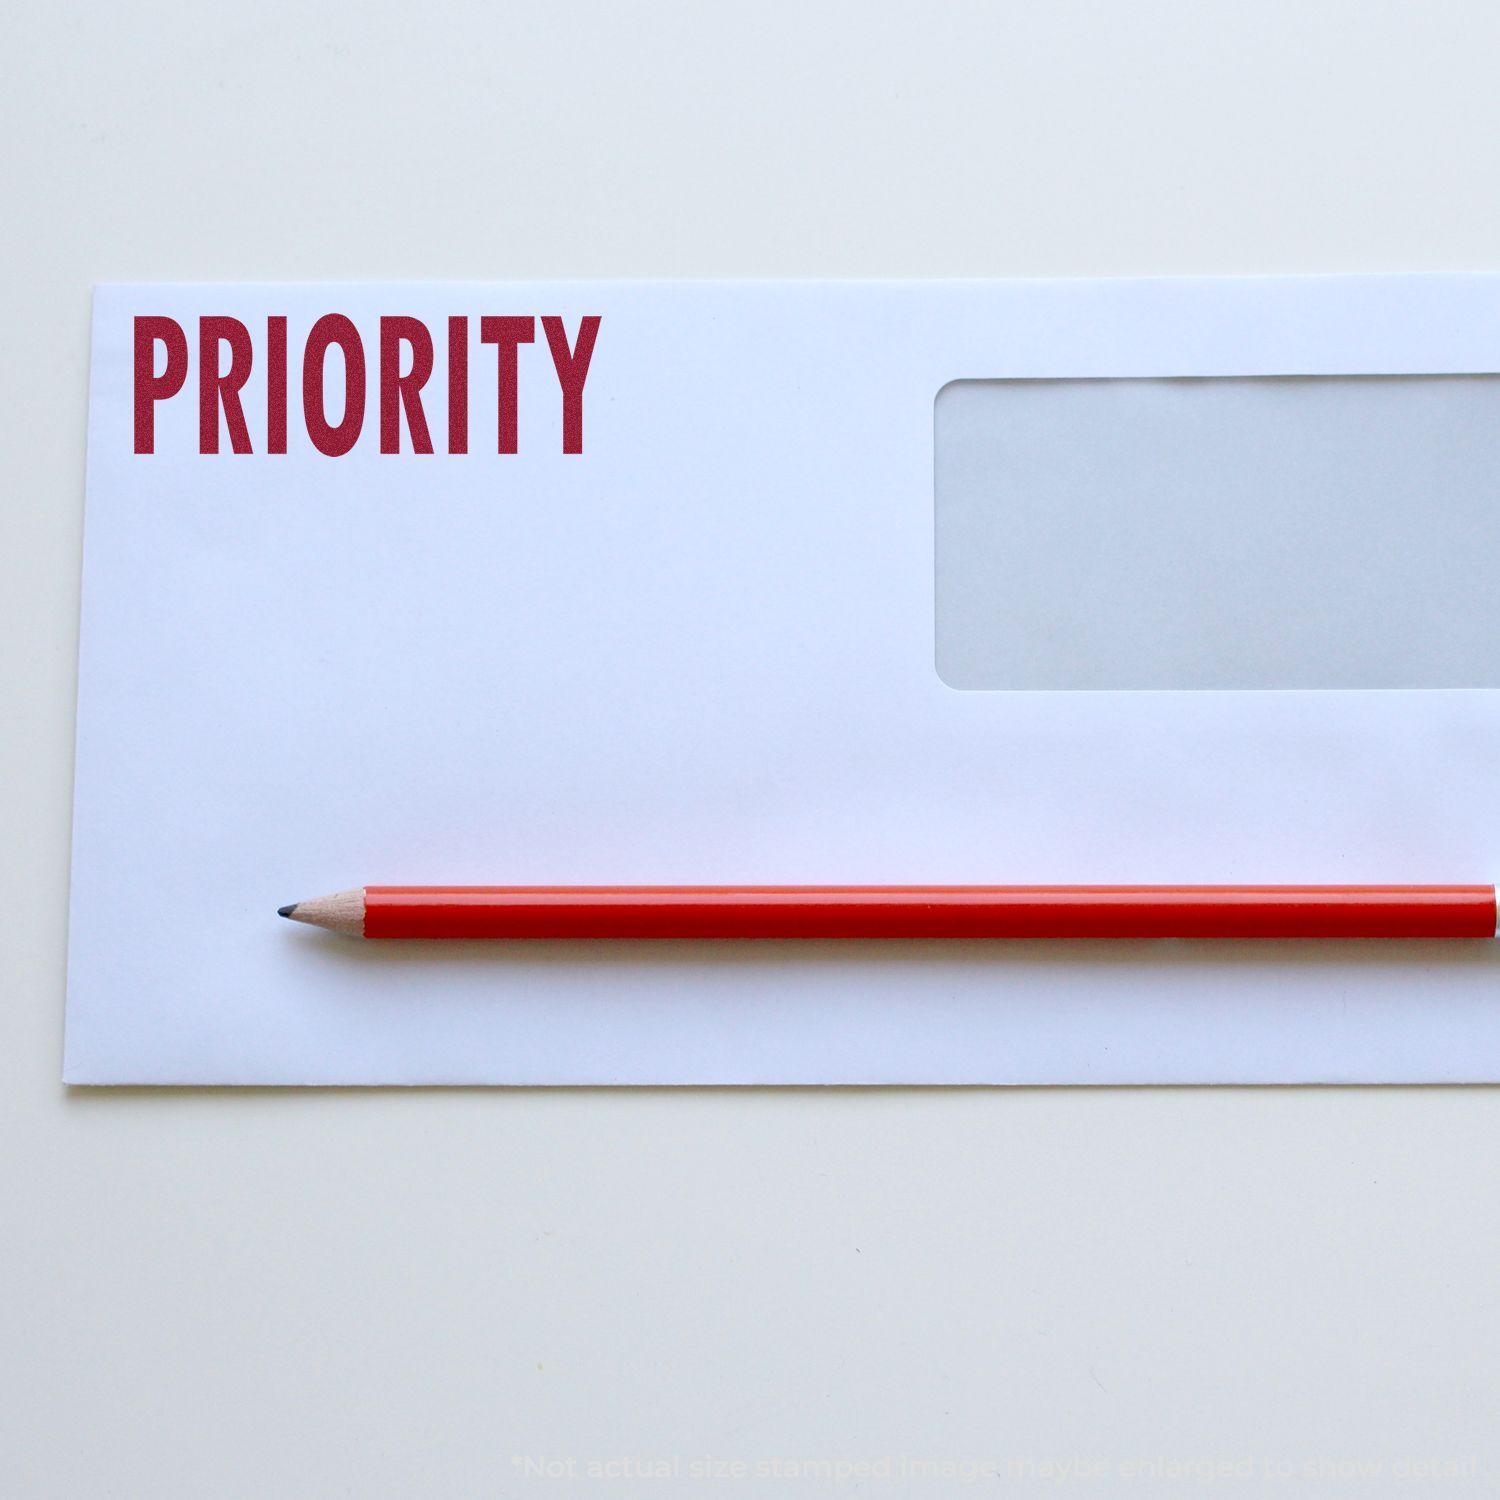 A self-inking stamp with a stamped image showing how the text "PRIORITY" is displayed after stamping.